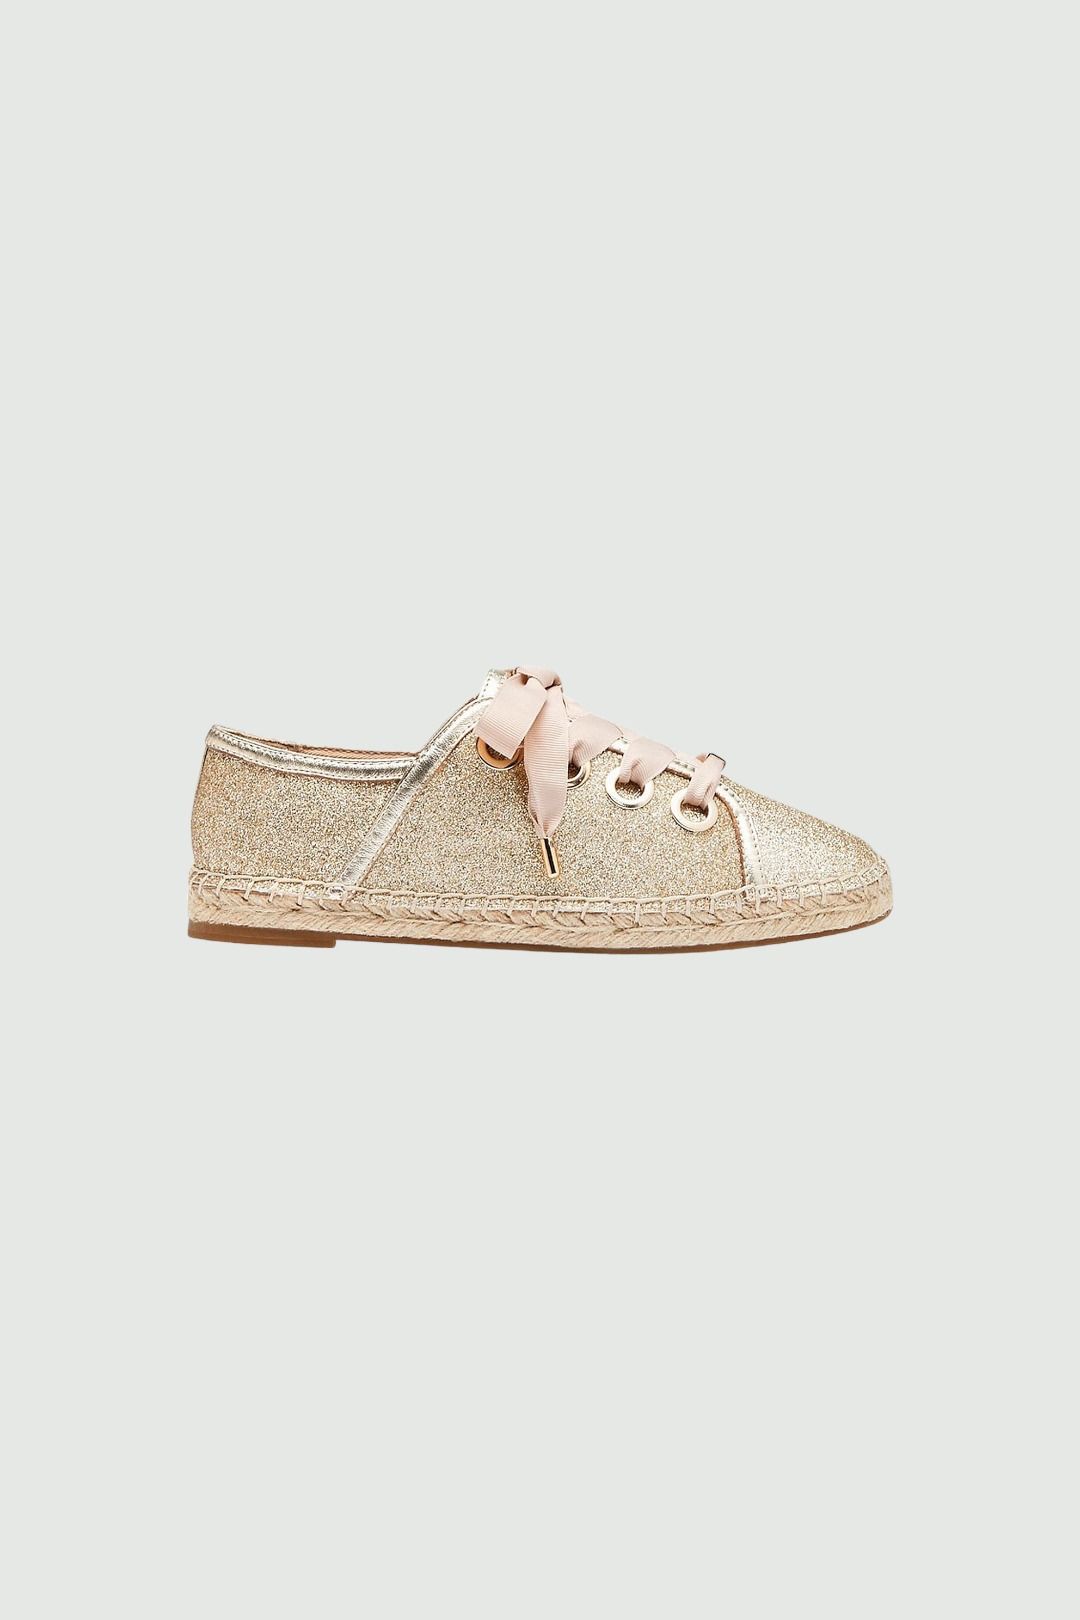 Mimco Gold Flare Lace-up Espadrille